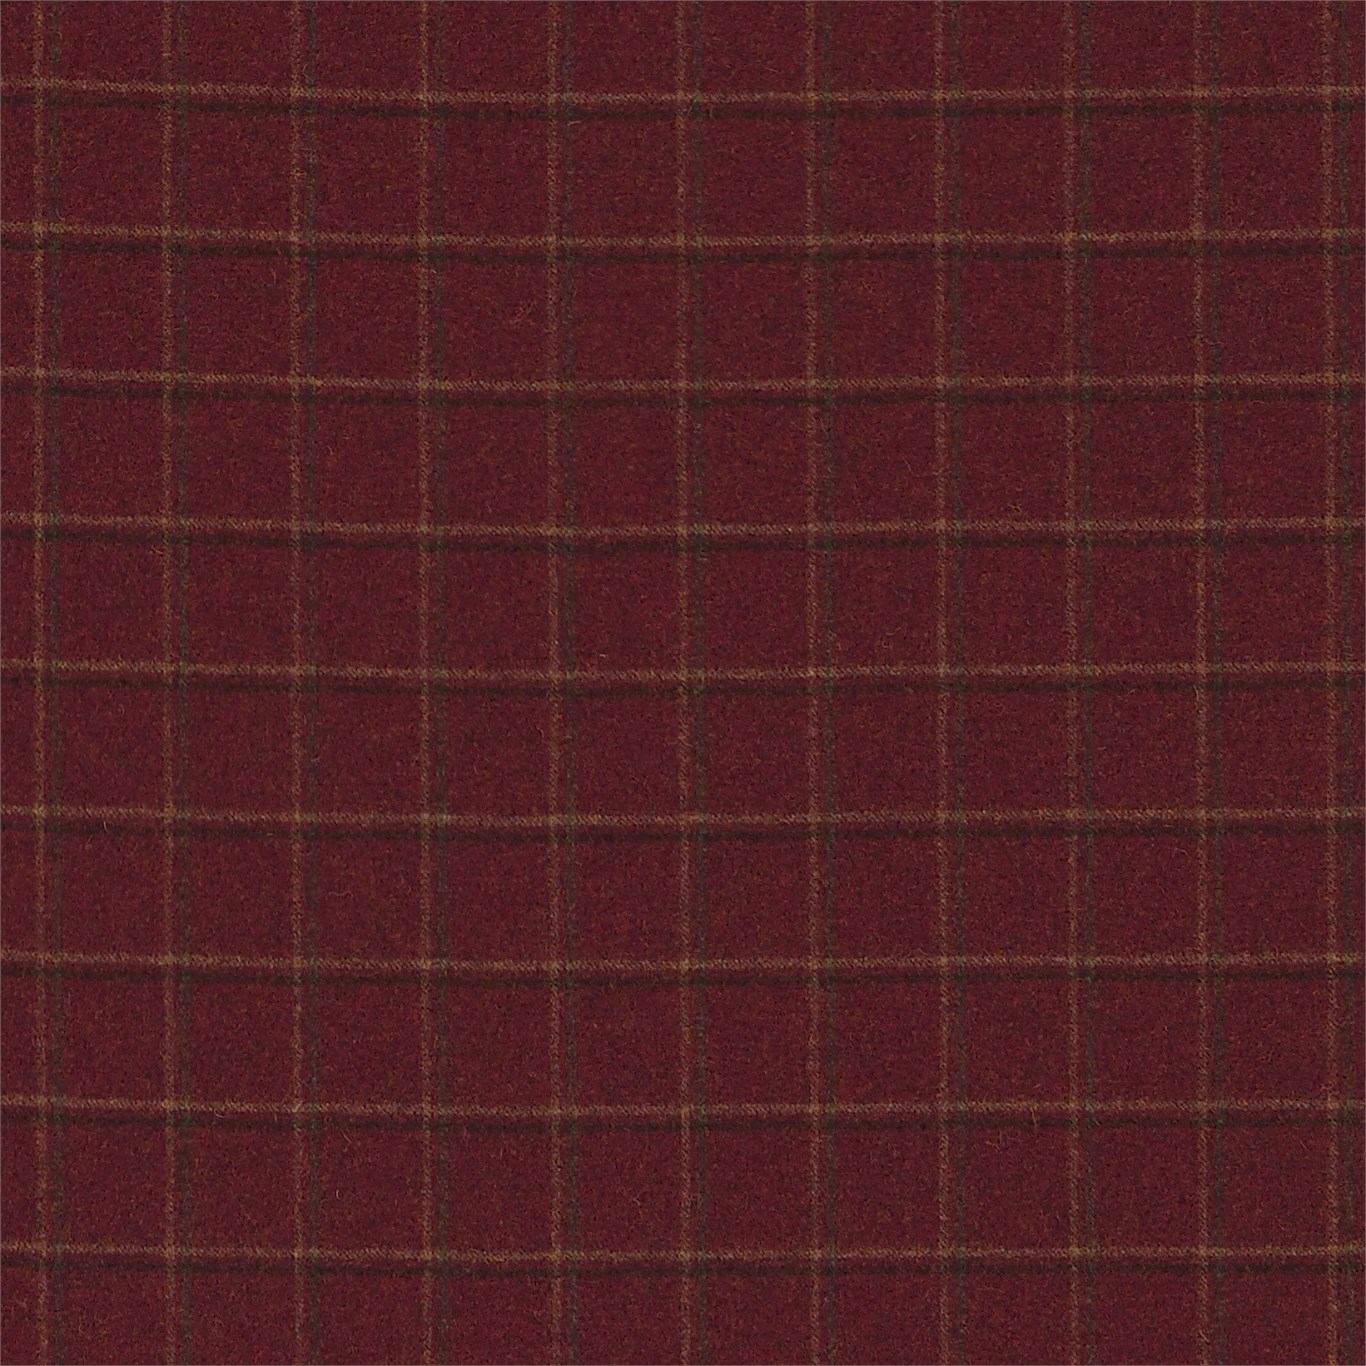 Woodford Check Church Red/Biscuit Fabric by MOR